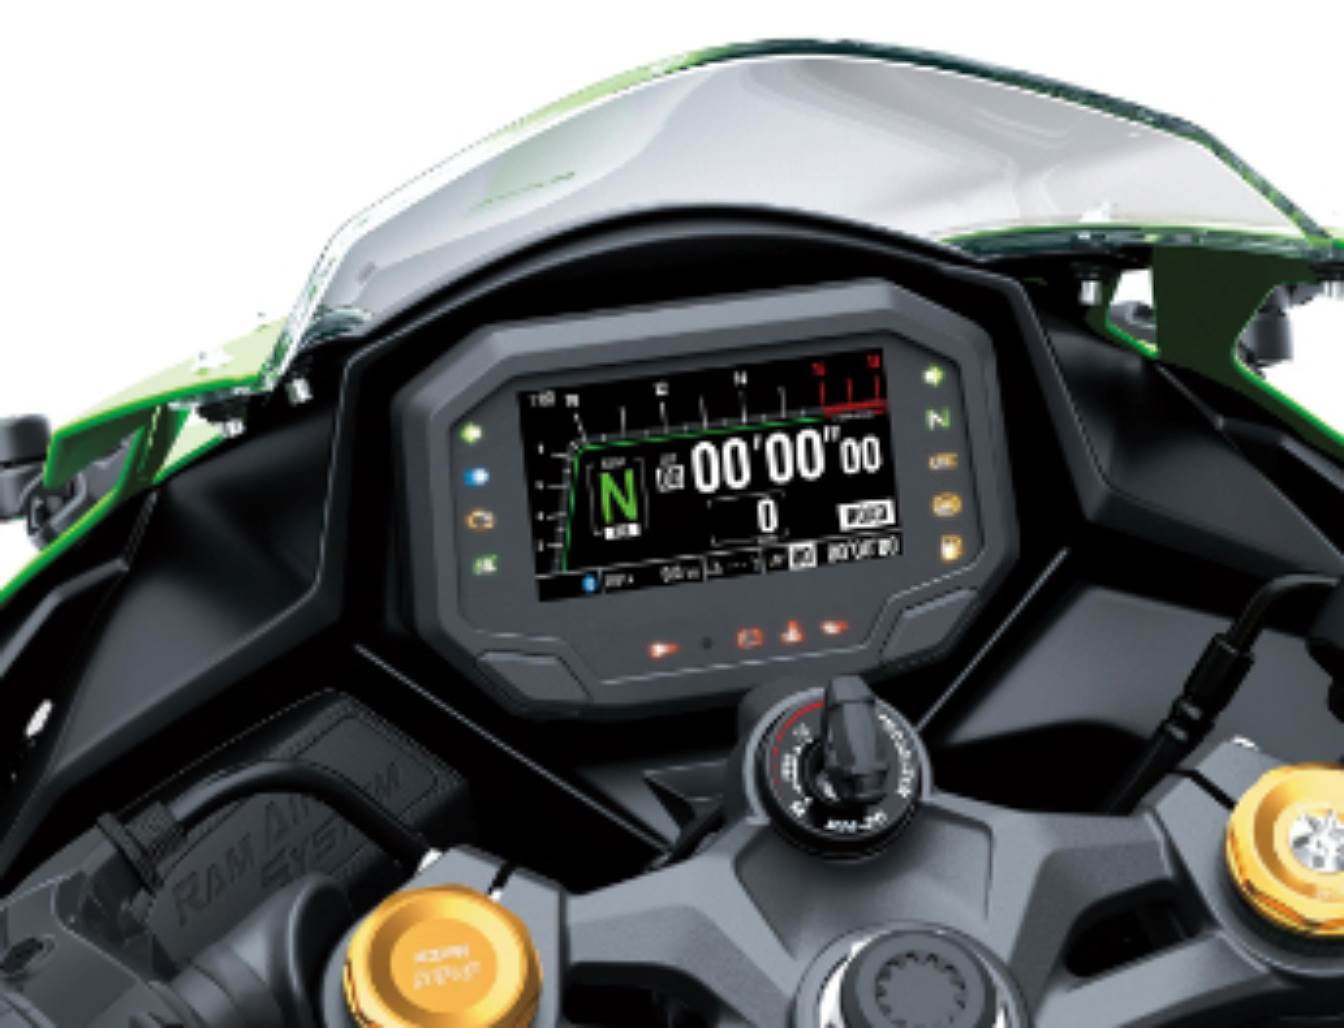 Kawasaki Ninja ZX-4R India launch price Rs 8.49 lakh, comes in just one colour